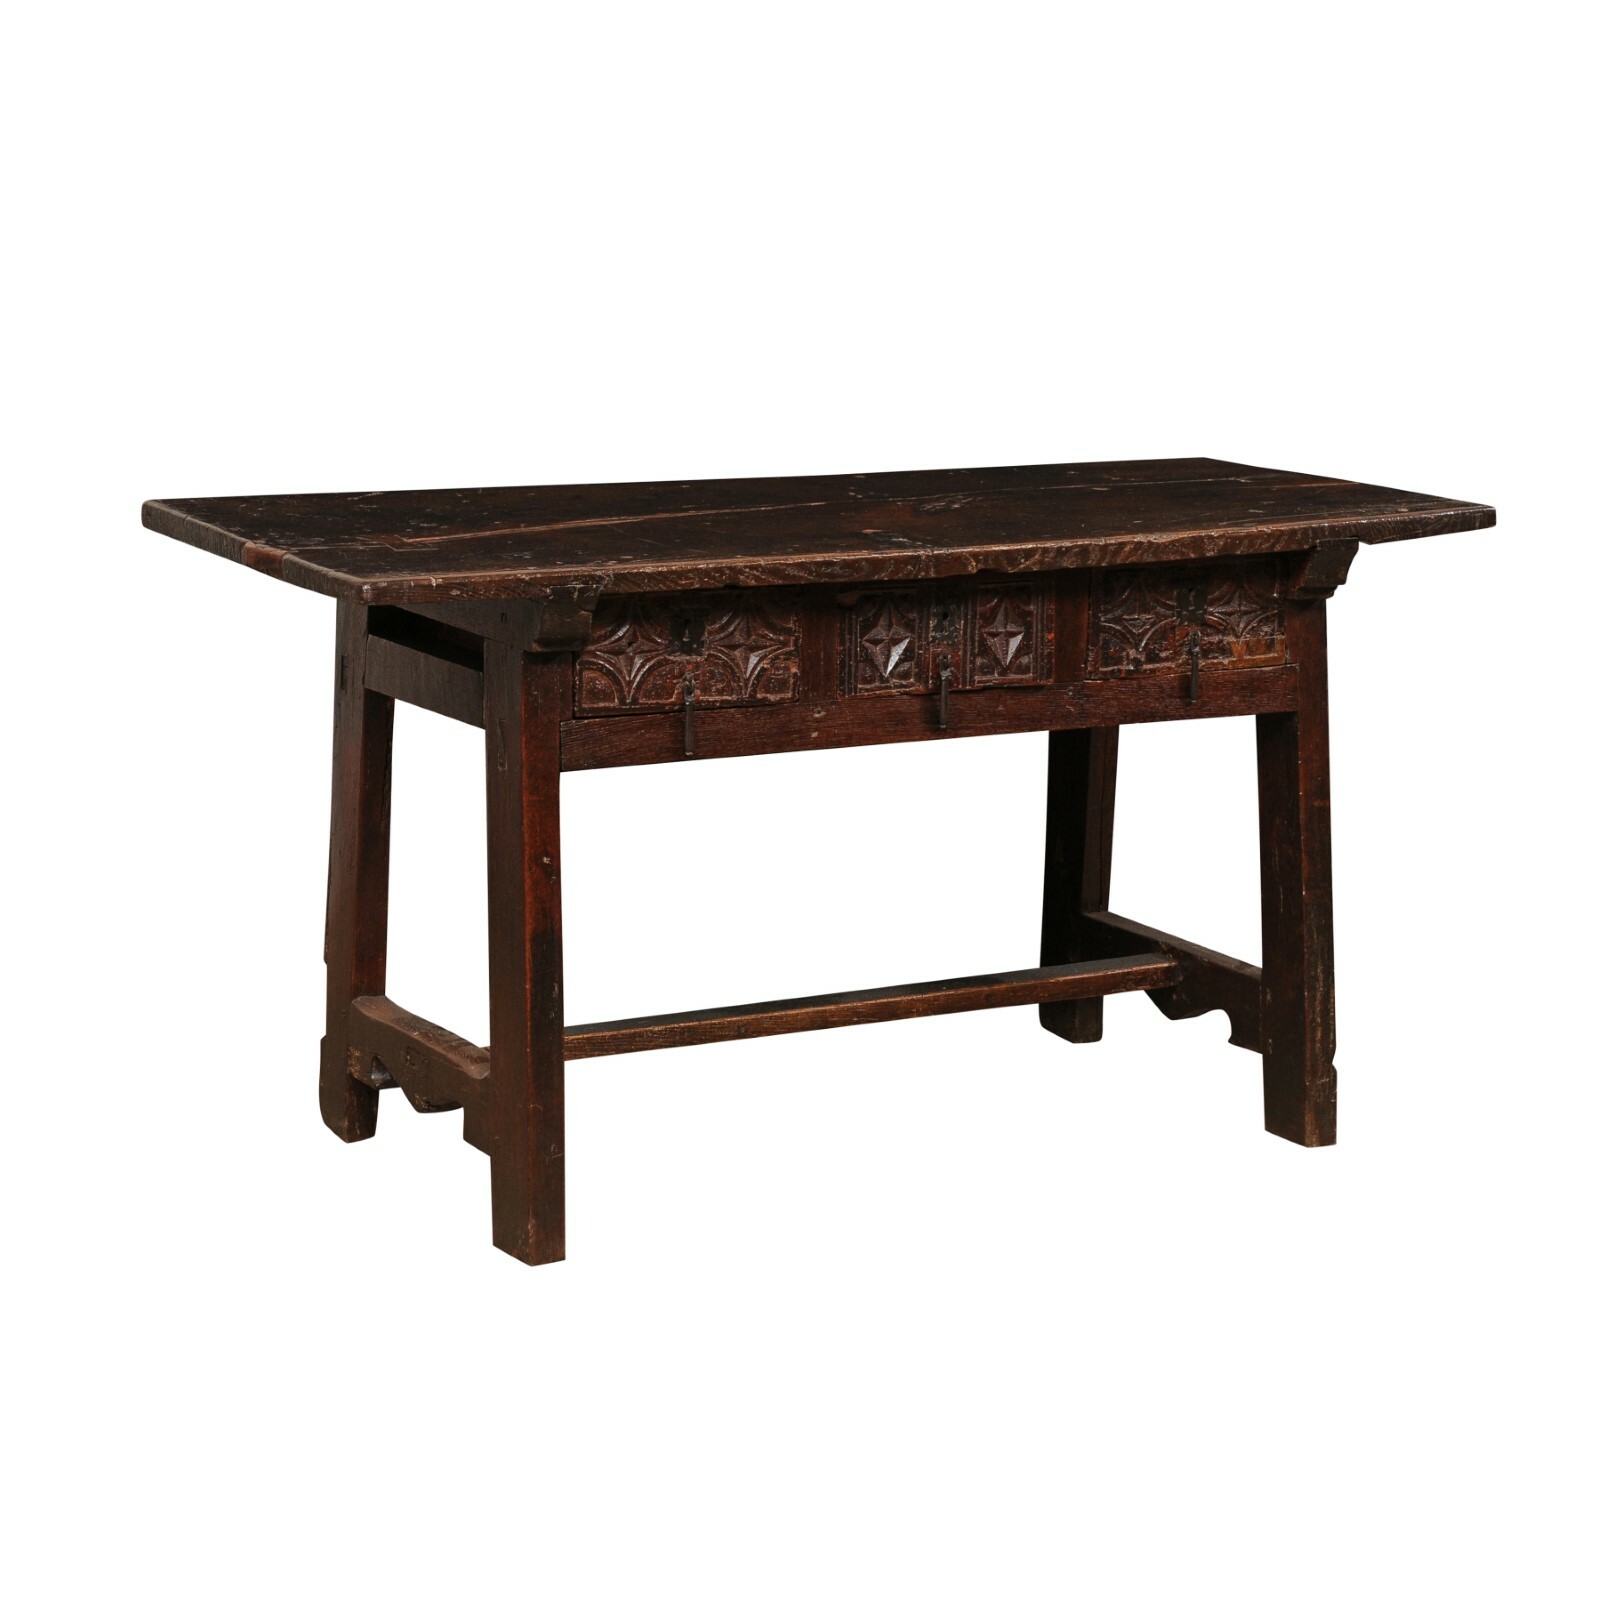 18th C. Beautifully Rustic Table from Spain